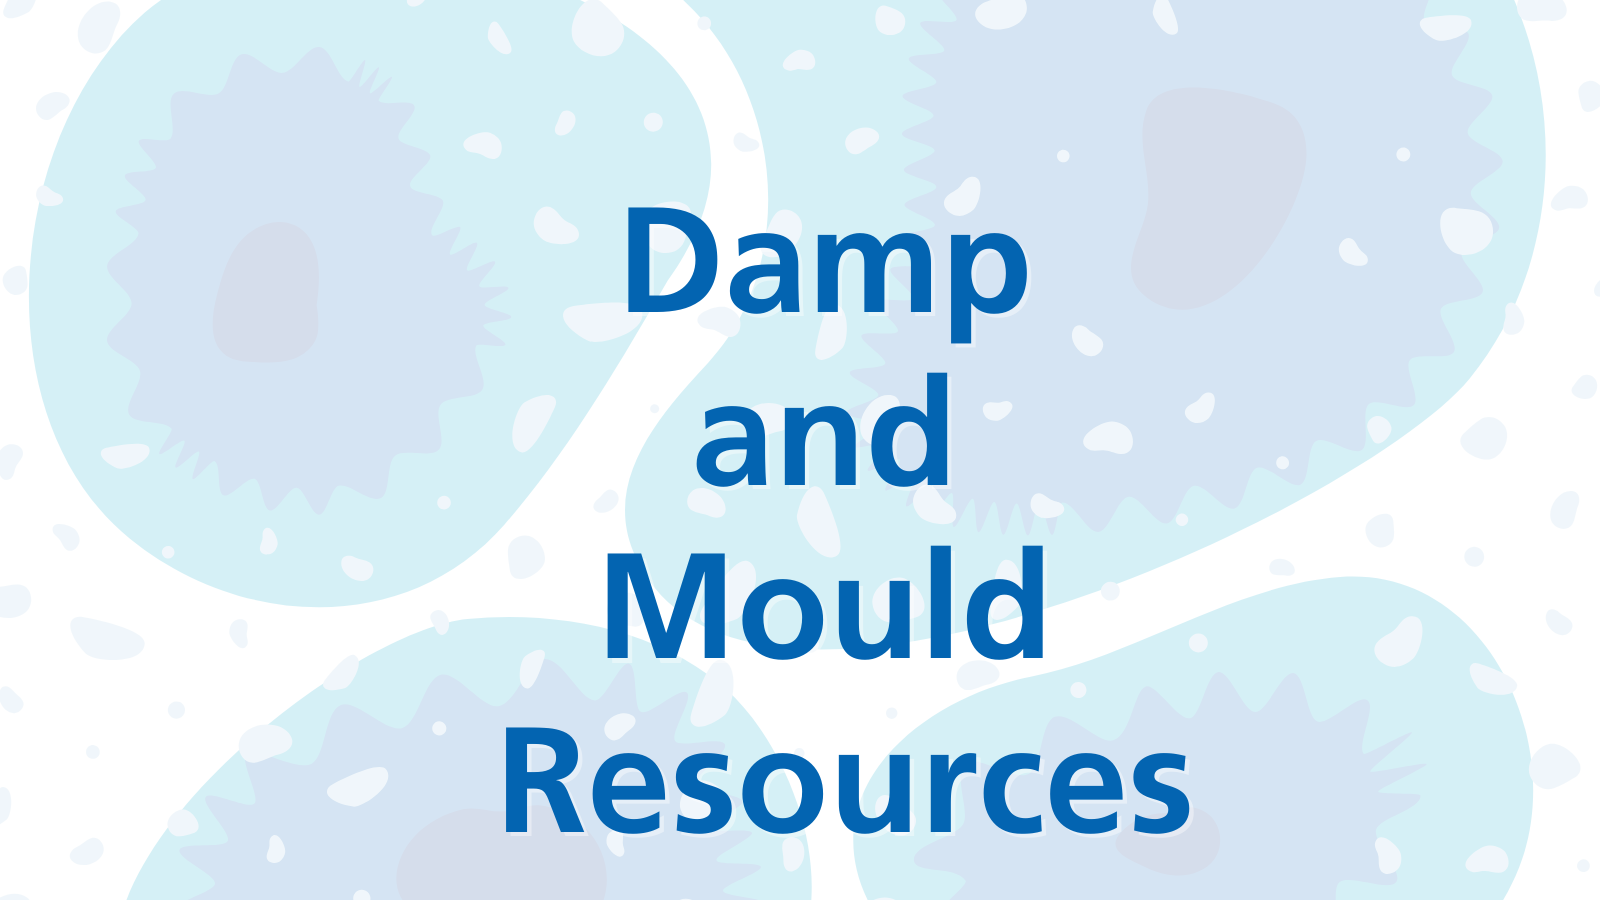 Text: Damp and Mould Resources